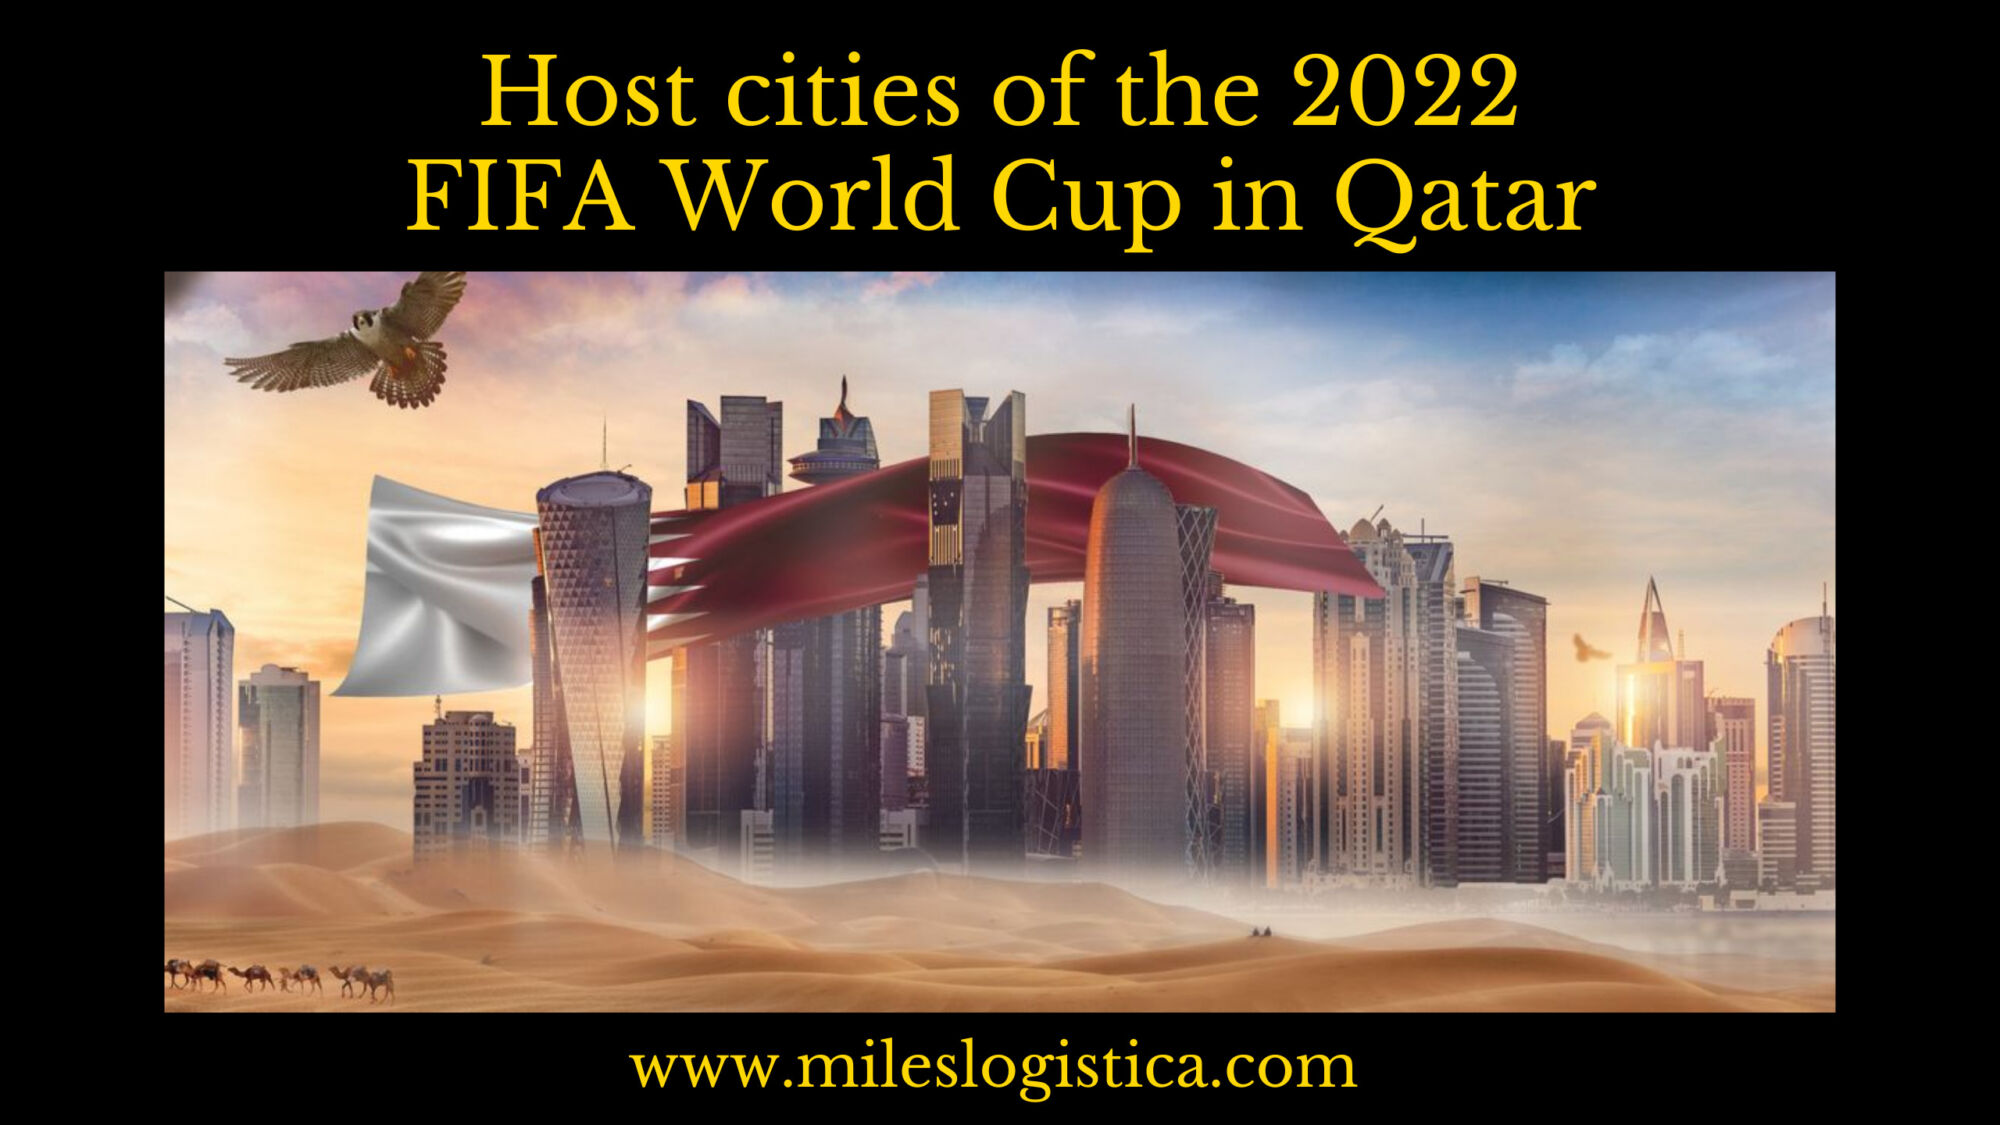 Qatar Hosts the 2022 FIFA World Cup A Look at the Cities That Are